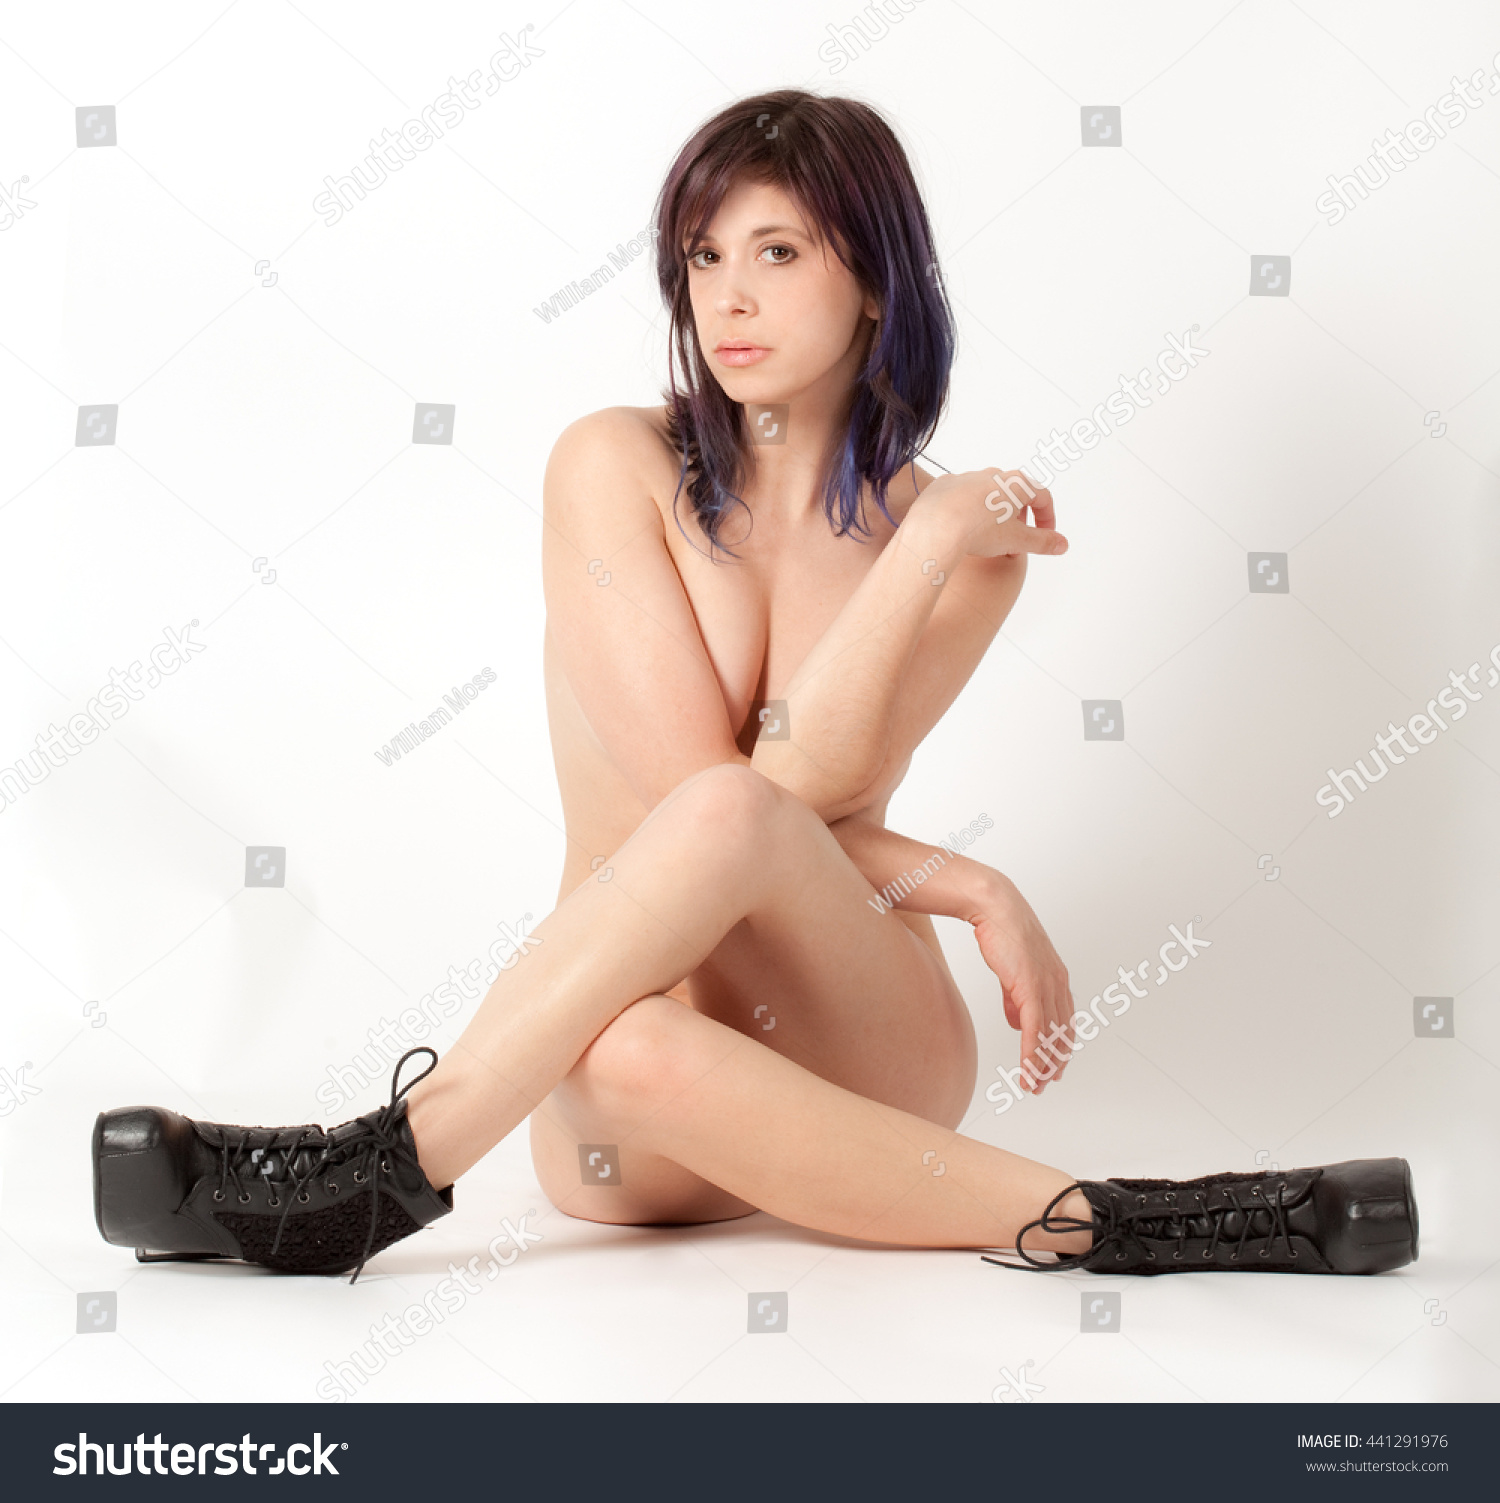 Nude woman in boots